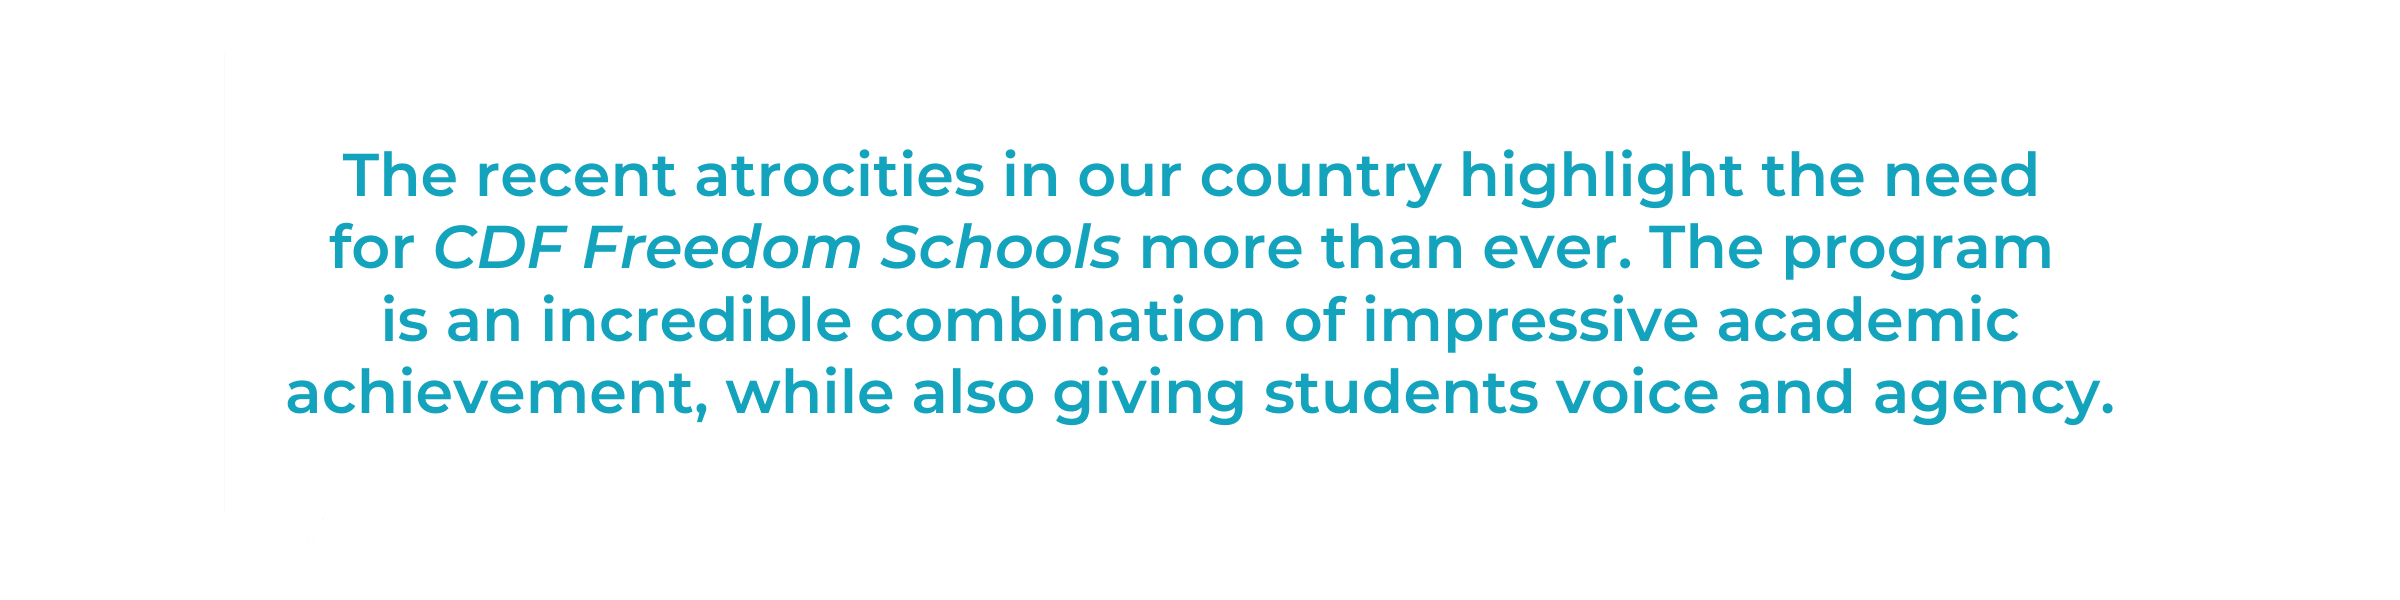 The recent atrocities in our country highlight the need for CDF Freedom Schools more than ever. The program is an incredible combination of impressive academic achievement, while also giving students voice and agency.